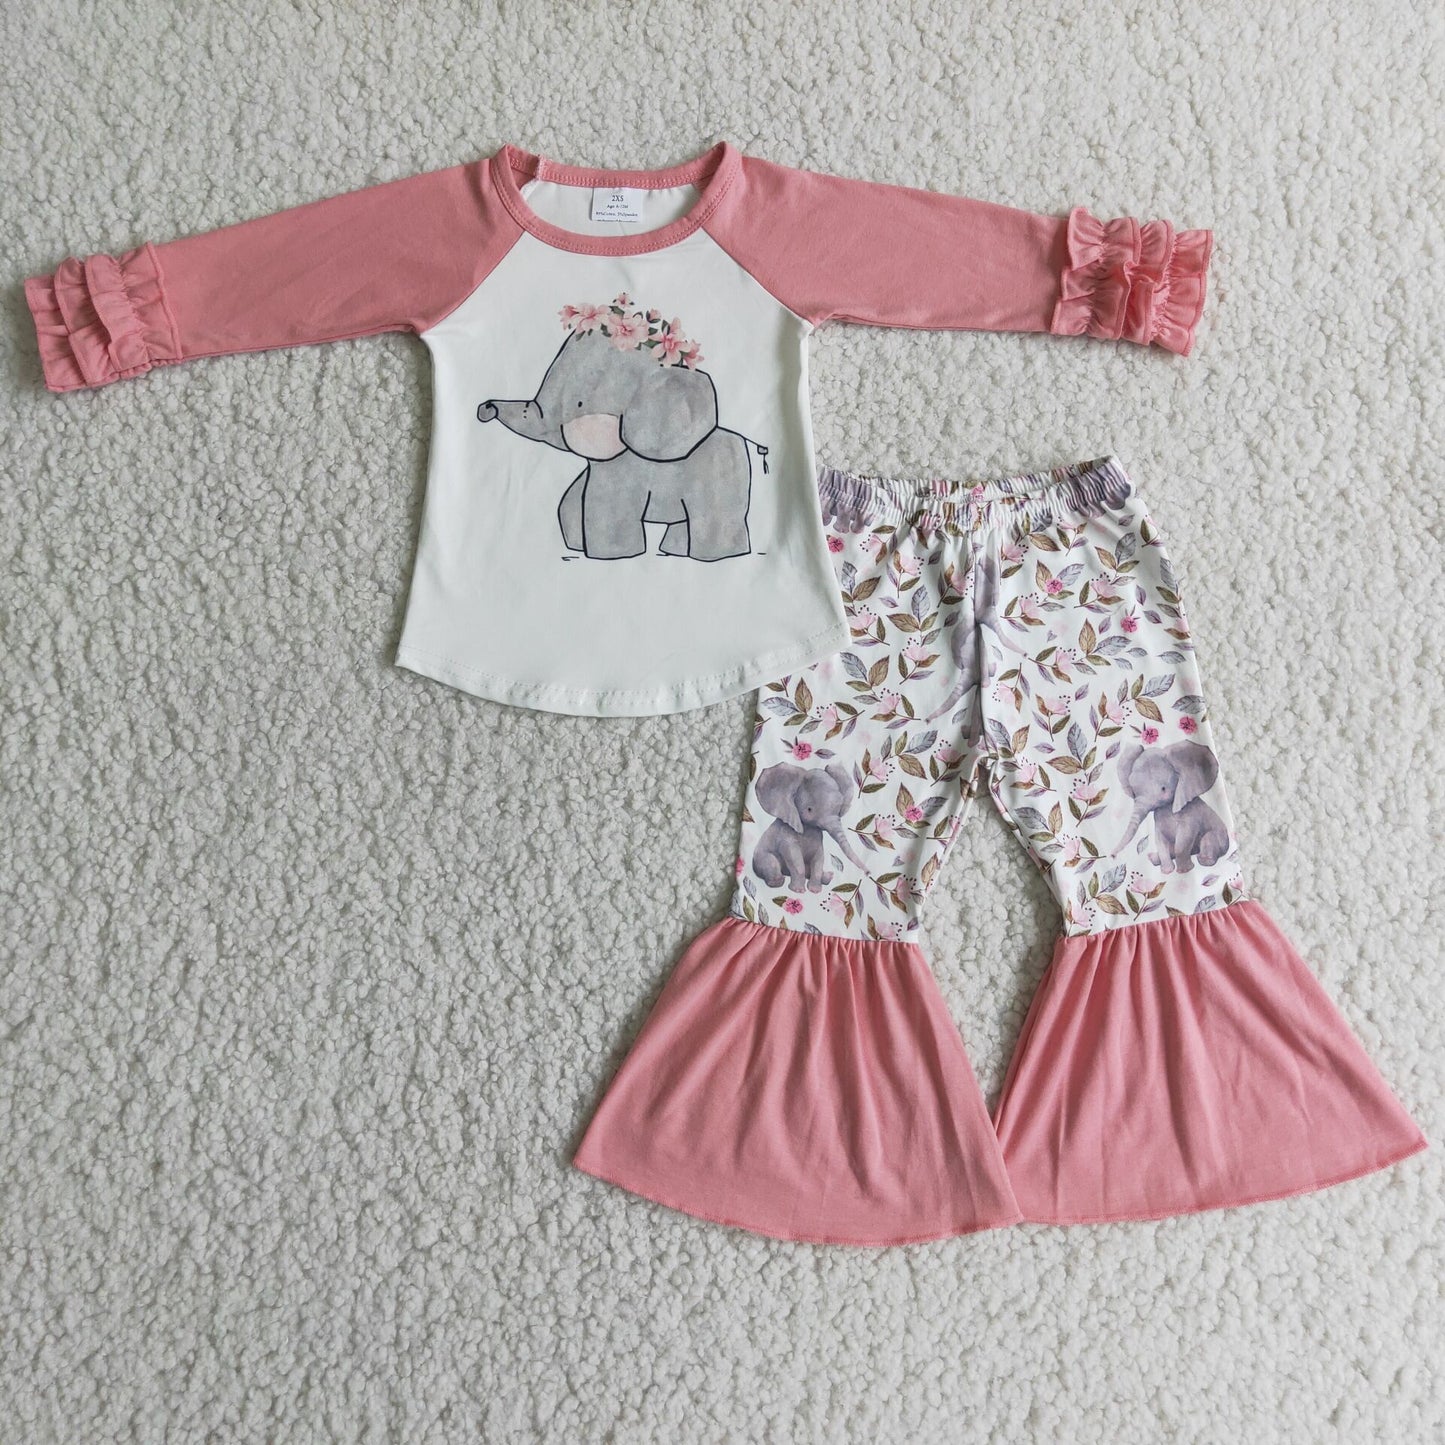 Elephant print bell bottom pants girls boutique clothes